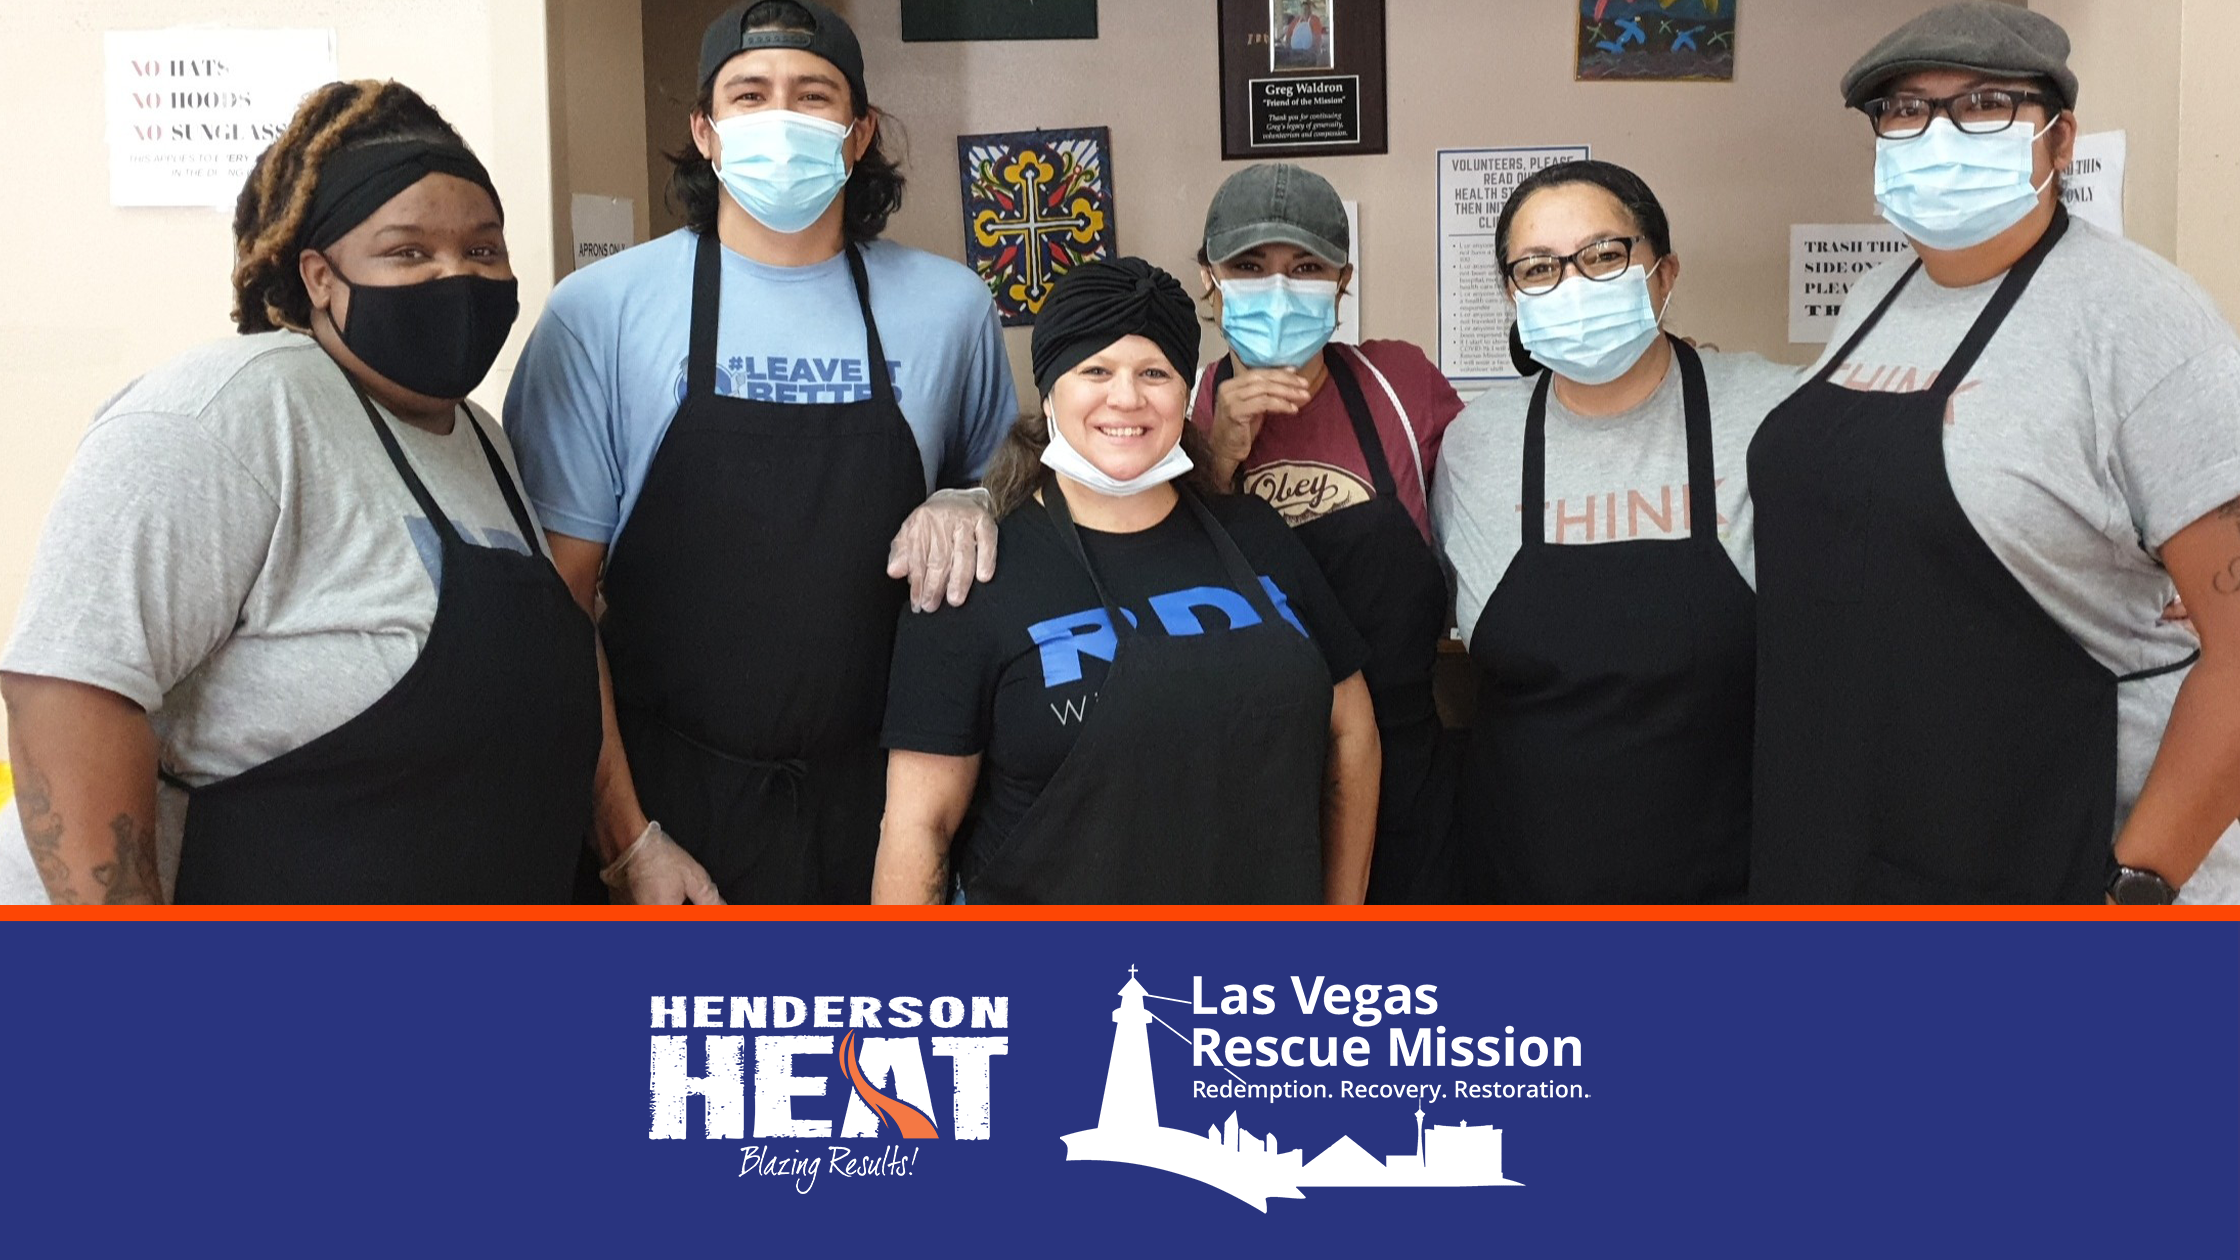 RDI Connect blog - RDI Connect Contact Center in Henderson Nevada Serves at the Las Vegas Rescue Mission